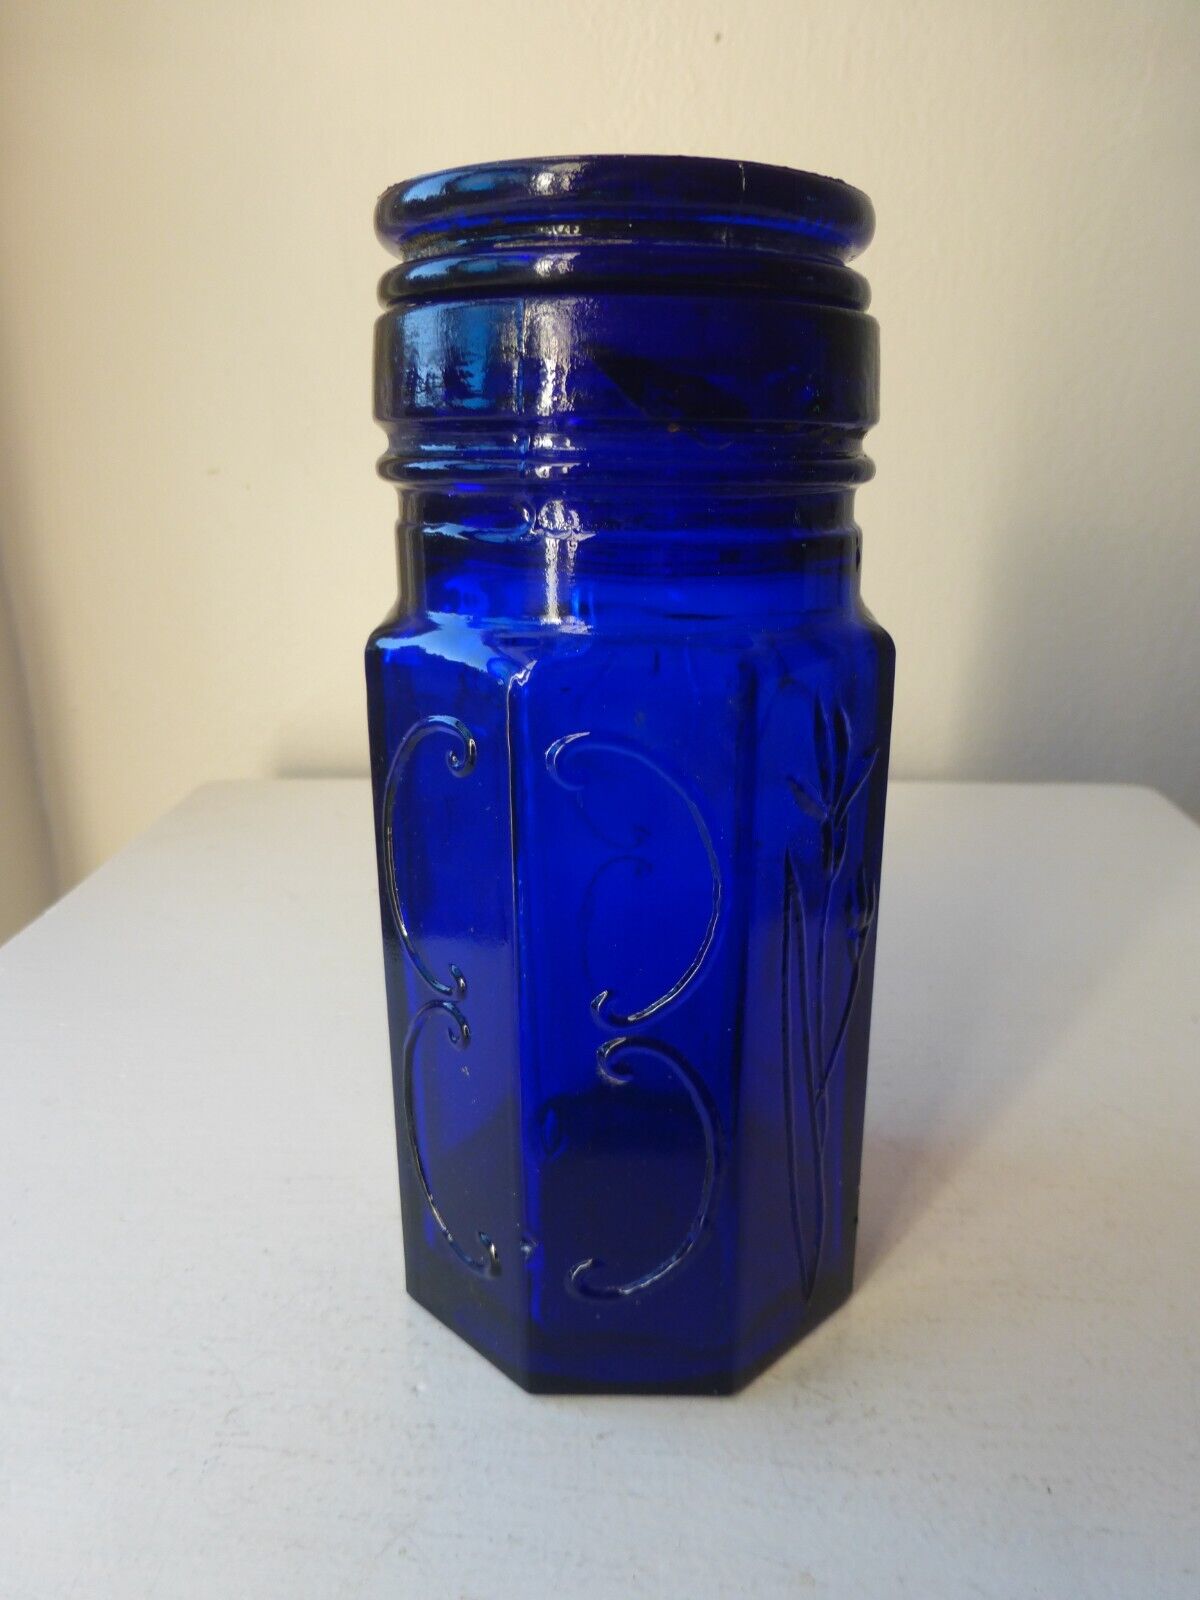 Vintage  Cobalt Blue Glass Jar with Lid  from Italy  excellent condition